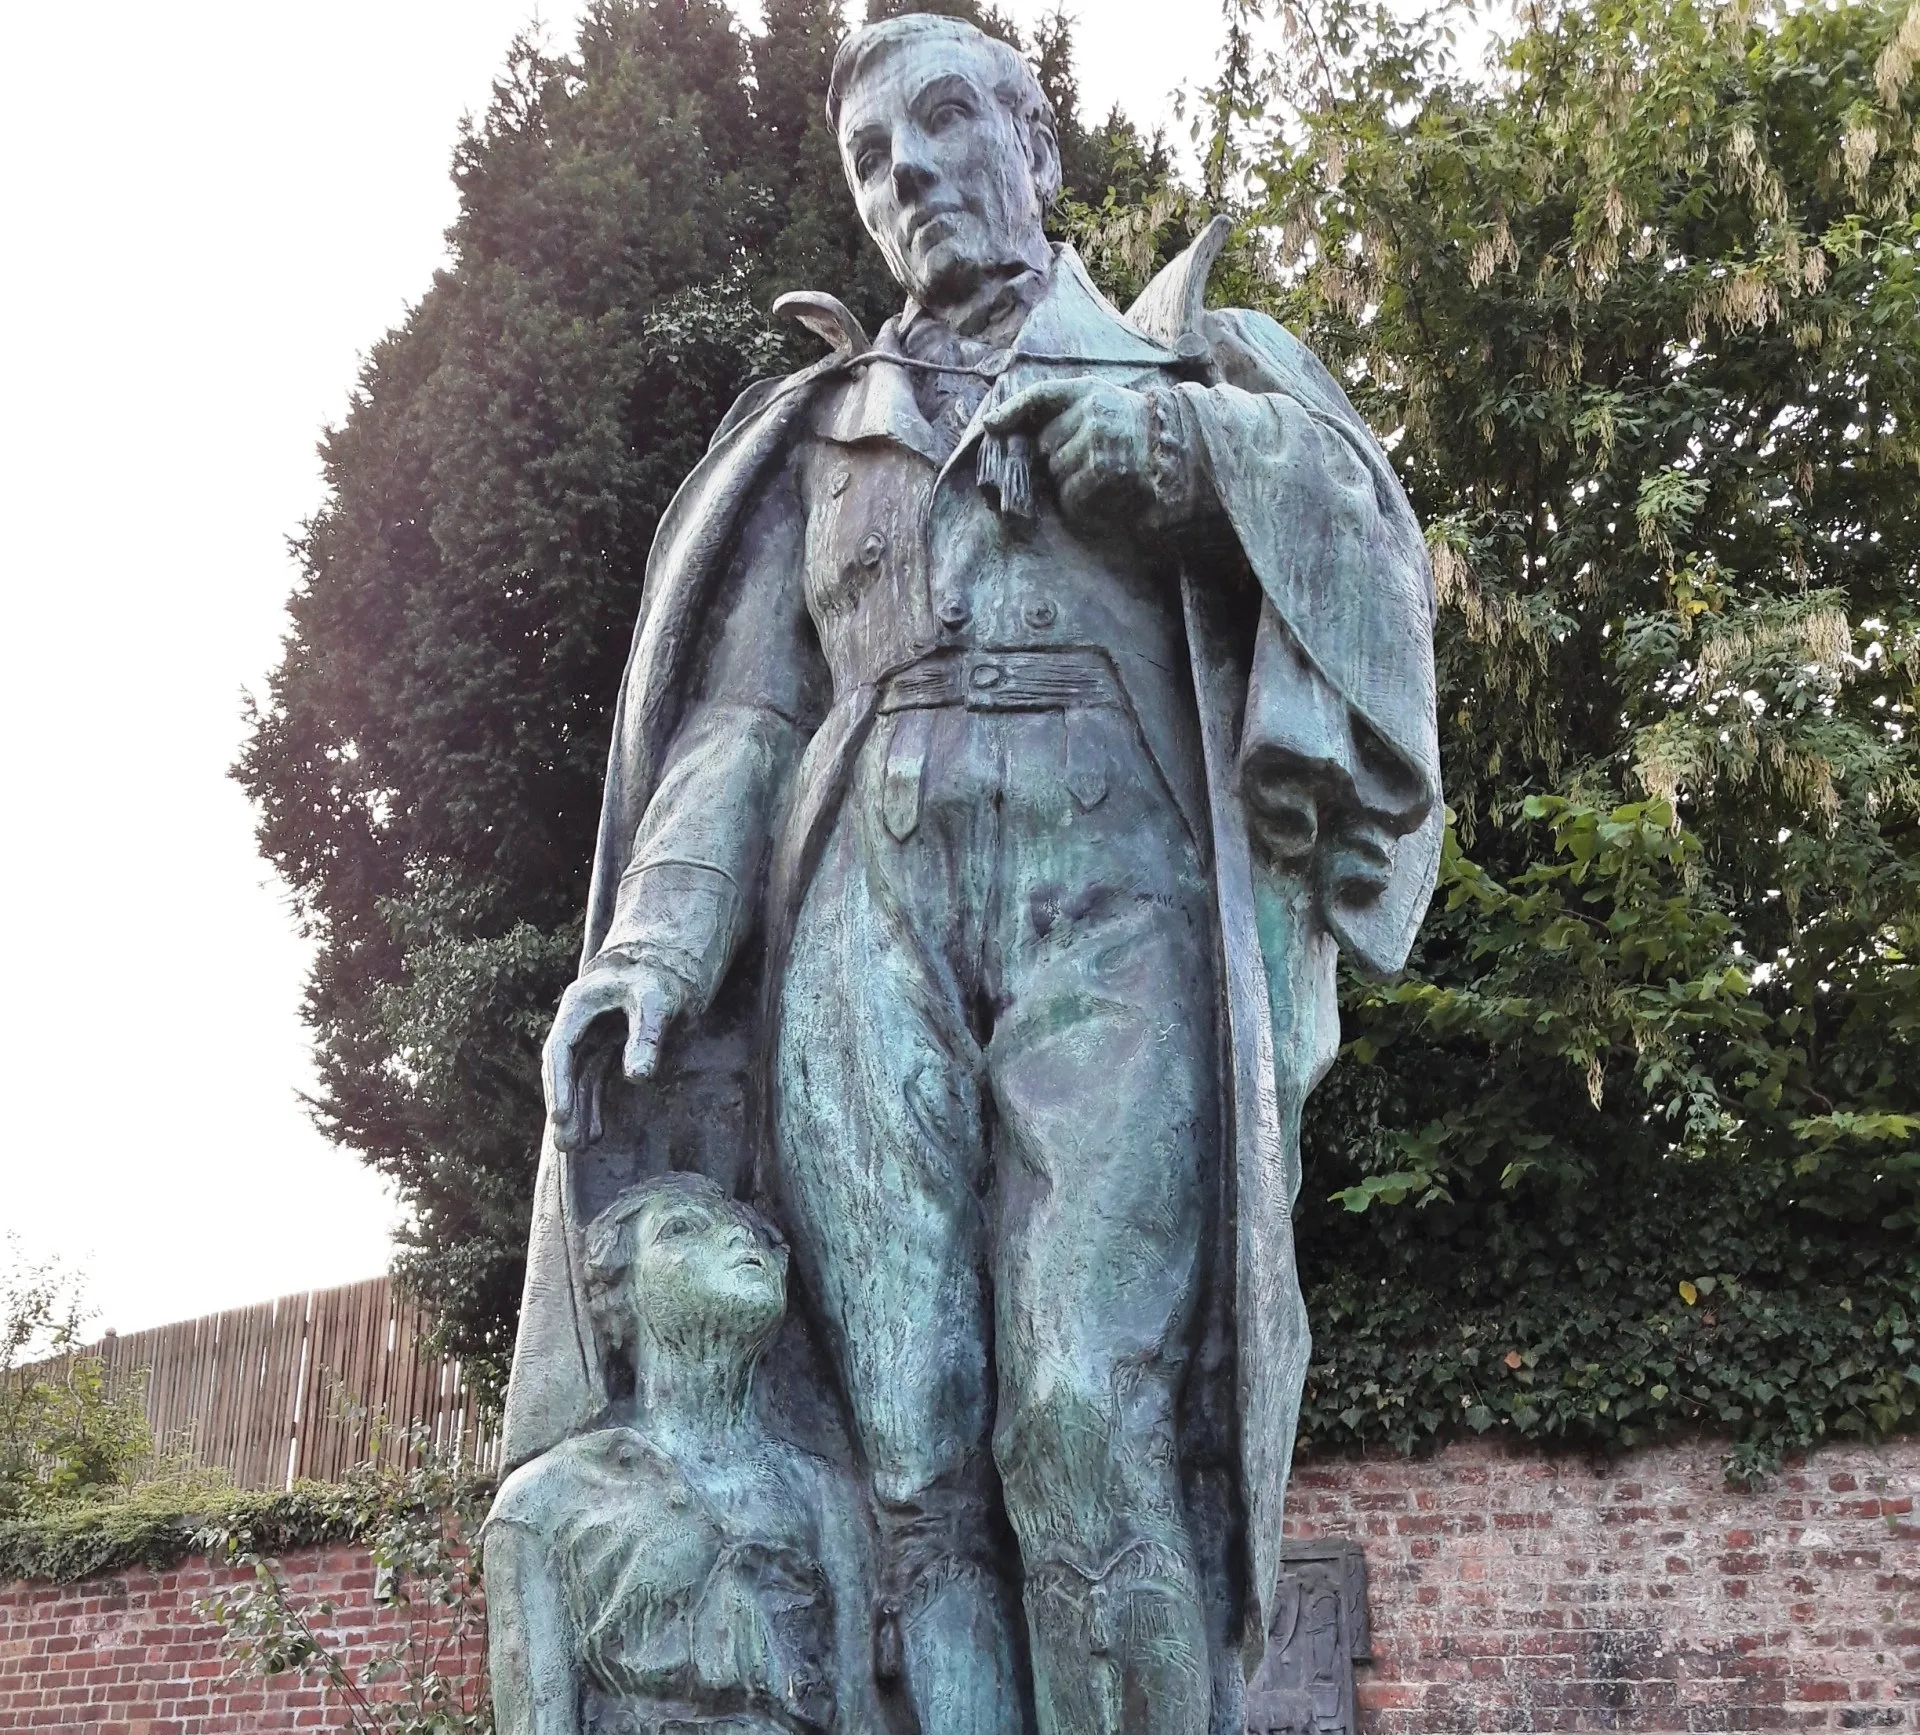 Robert Owen Statue in Newtown. He is with a child because he pioneered education for all children.